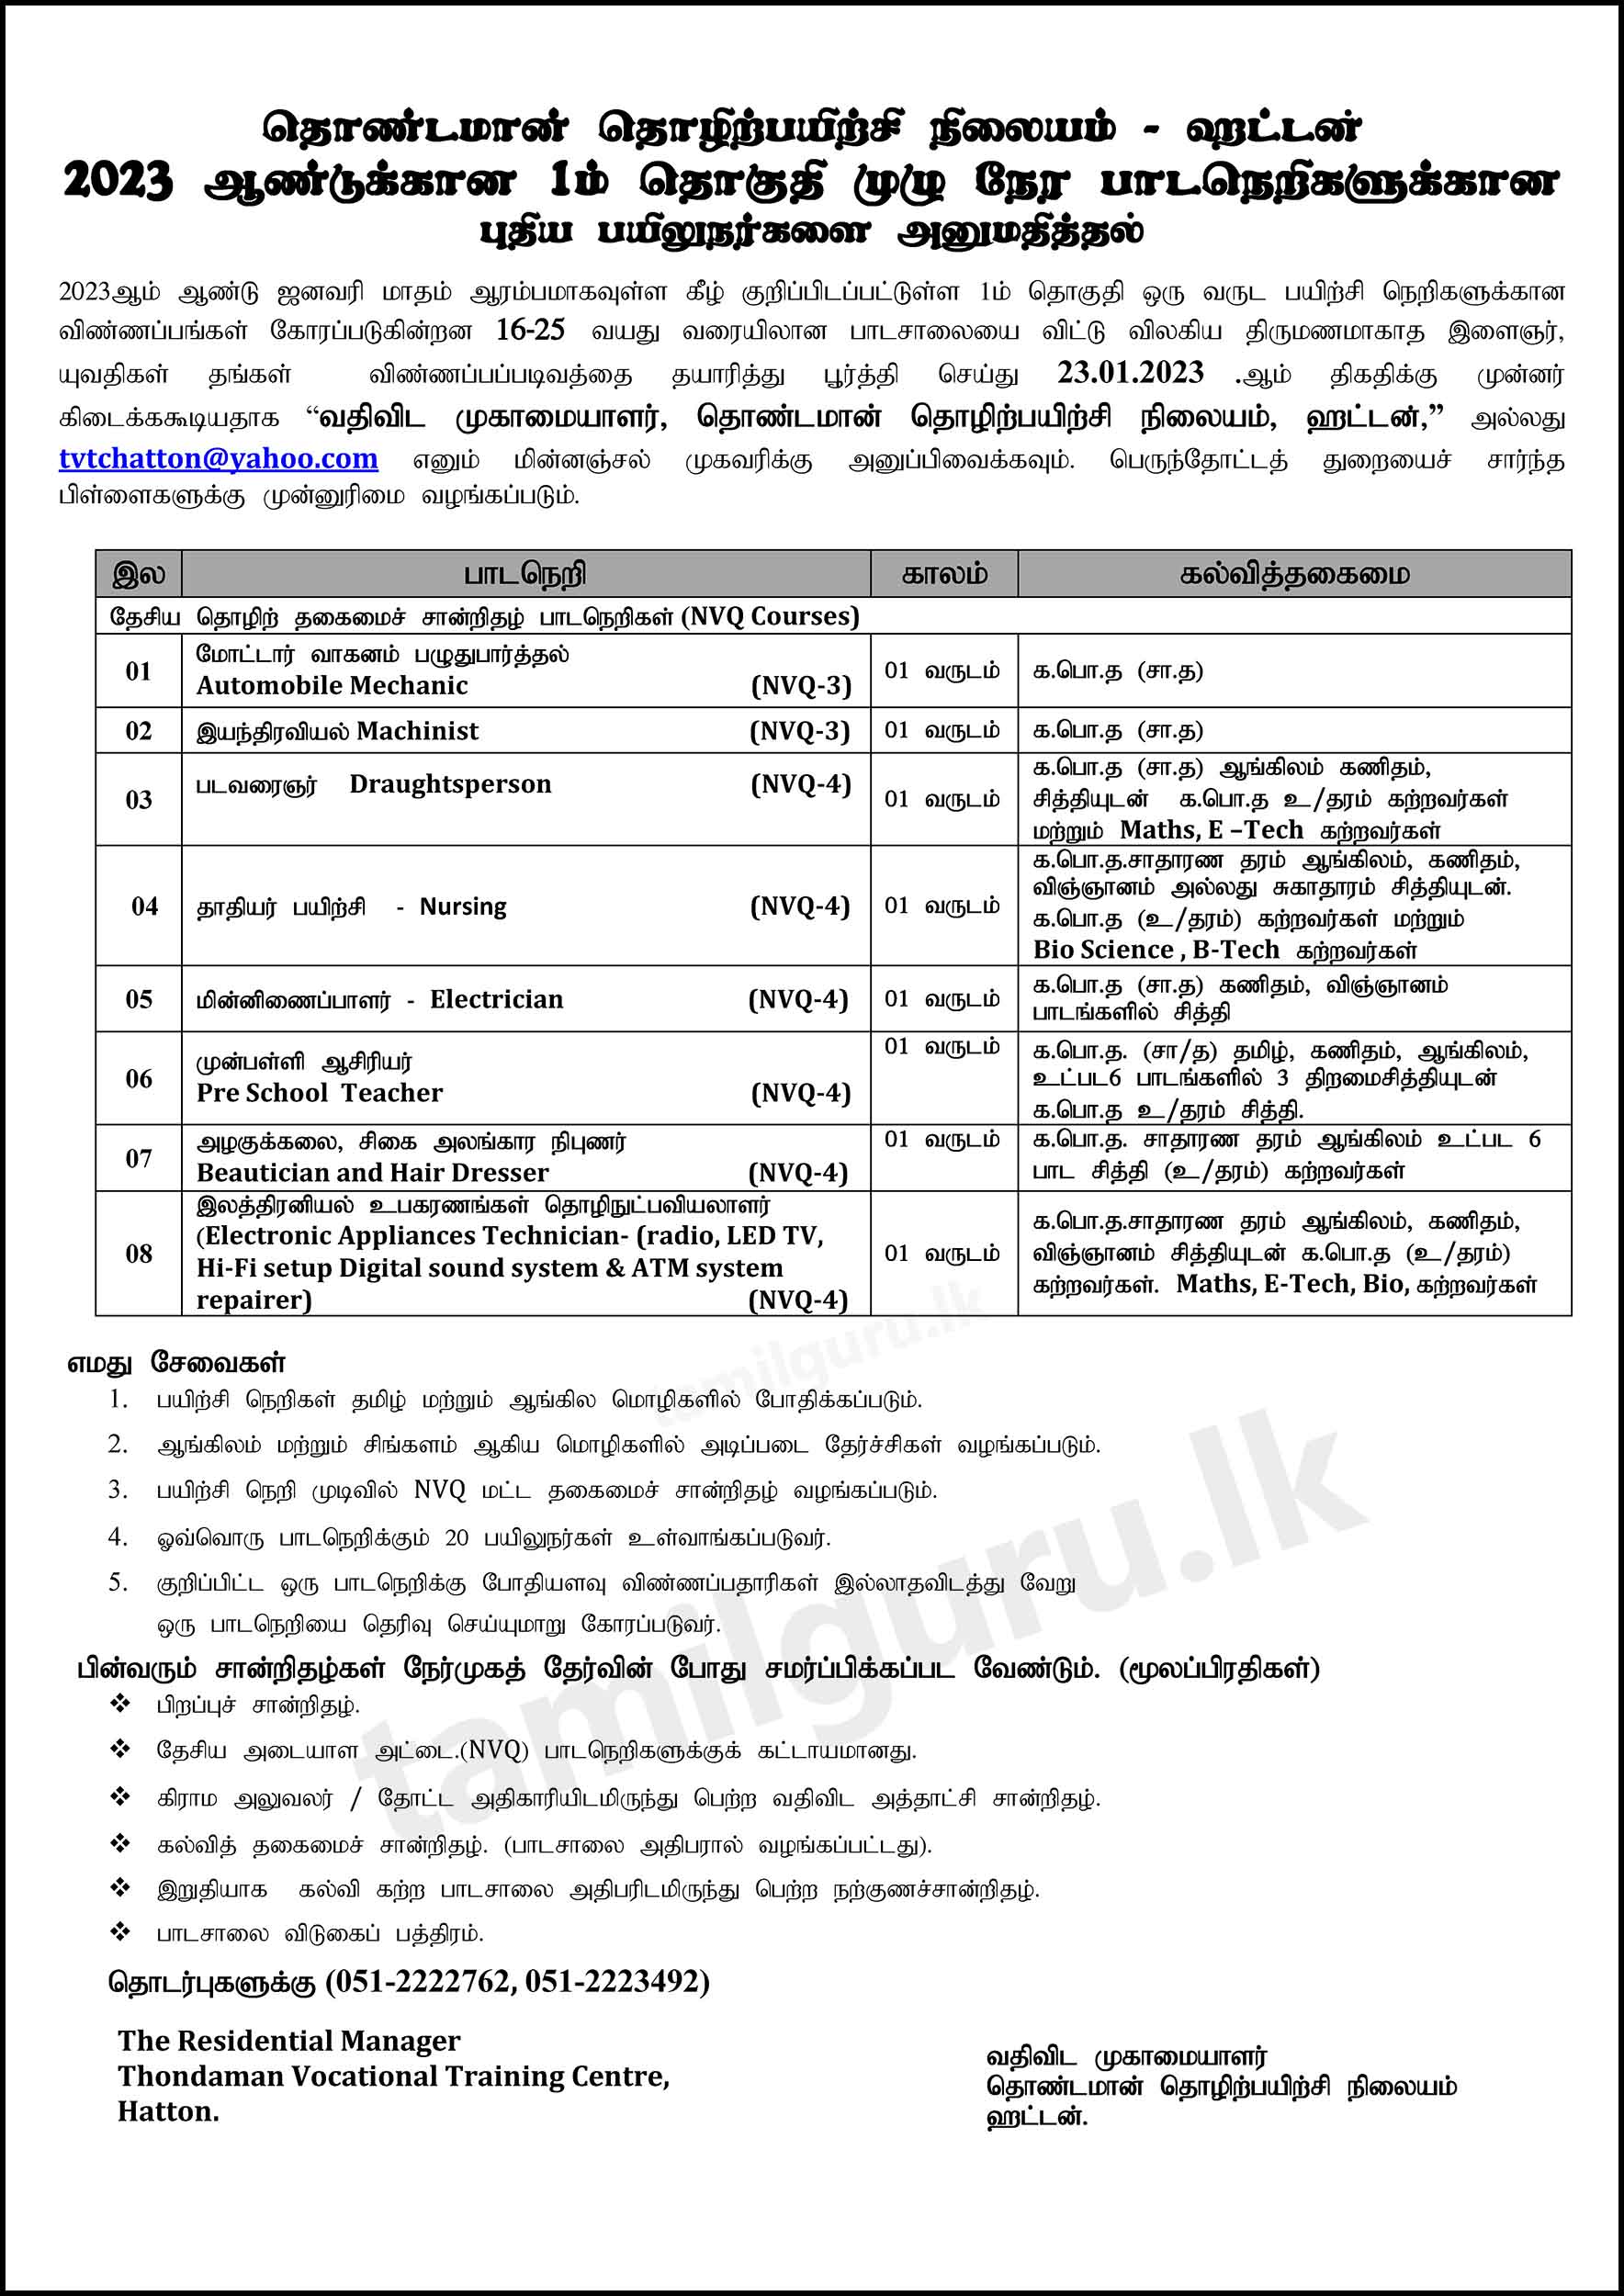 Thondaman Vocational Training Center (TVTC) - Admission for Full-Time Courses 2023